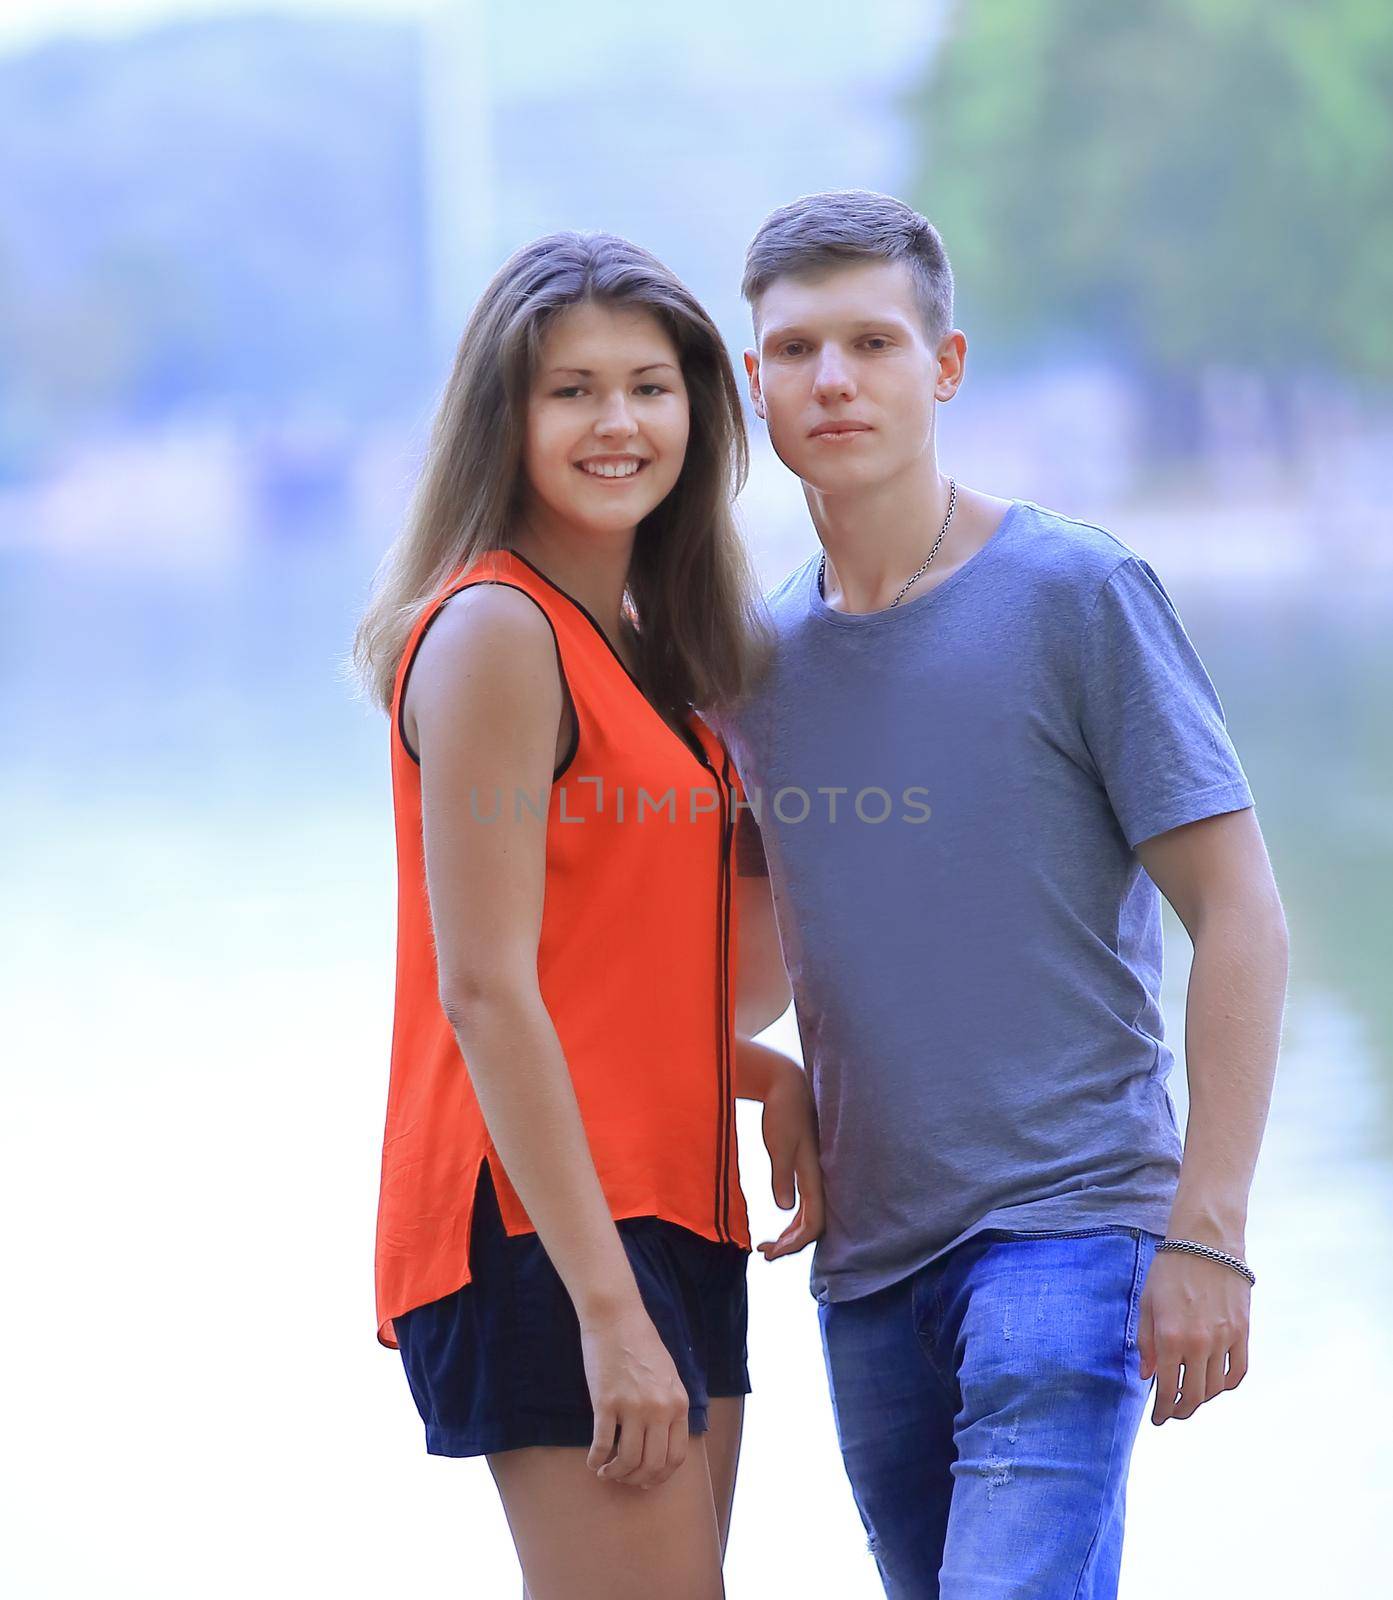 student pairs on blurred background of lake city by SmartPhotoLab